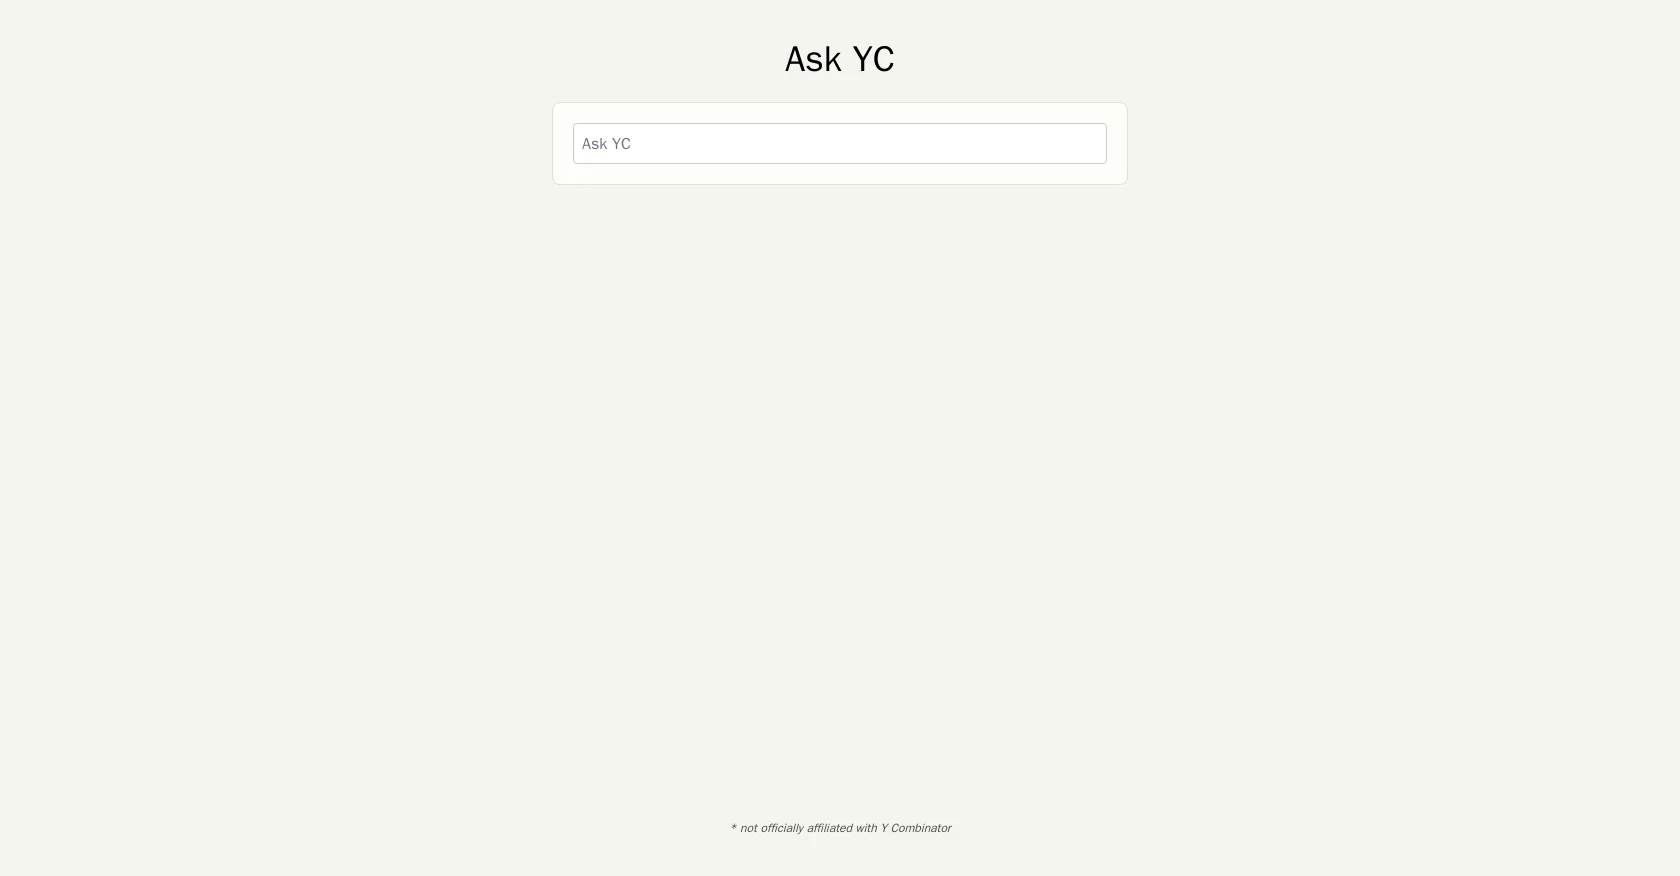  Ask anything to get answers from Y Combinator’s